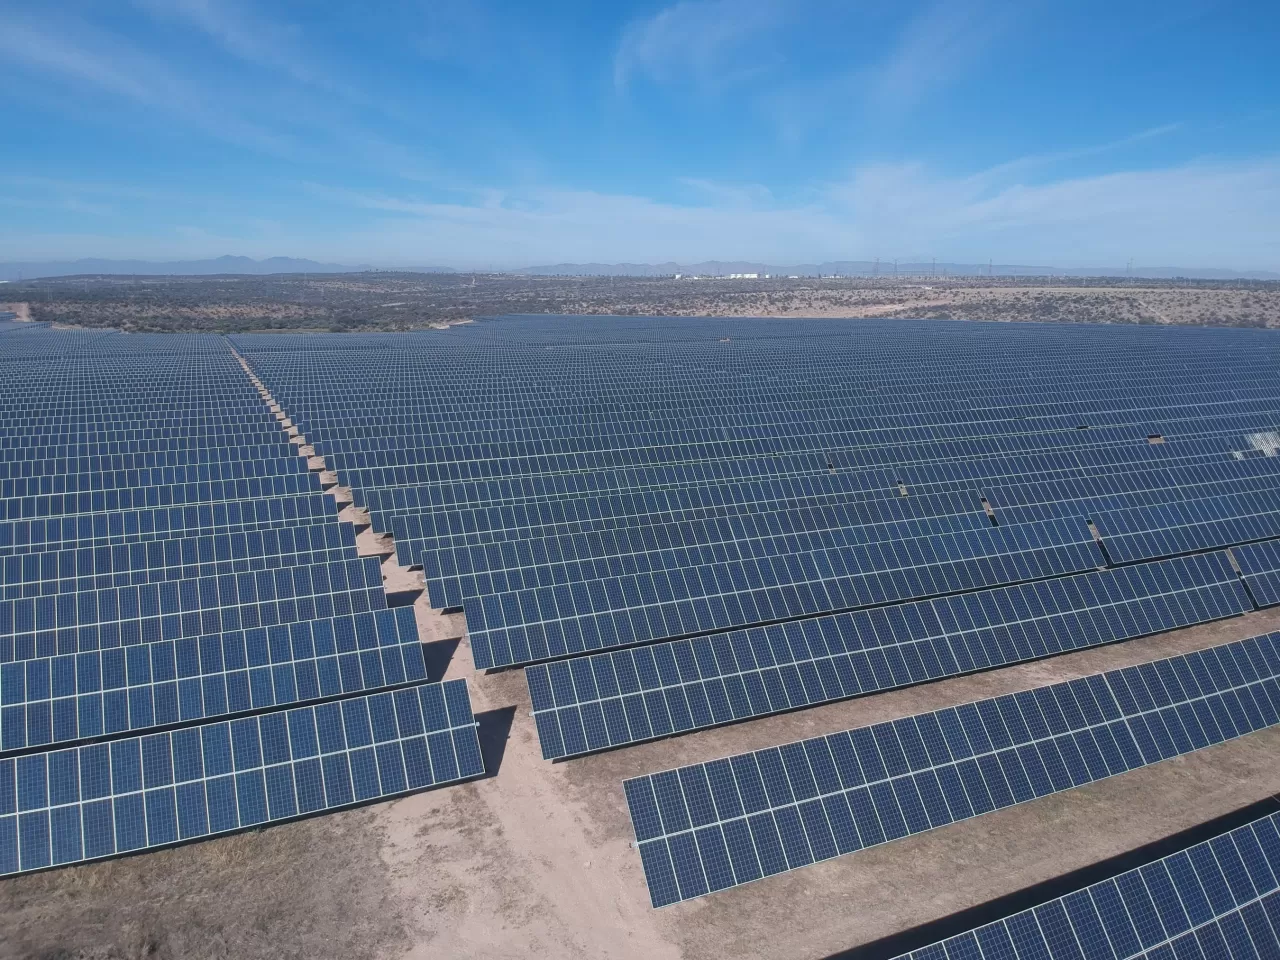 Soltec, a Spain-based global solar equipment manufacturer, is utilizing Altair’s simulation, data analytics, and other solutions to optimize existing technology and develop new products. Image courtesy of Soltec. img#2